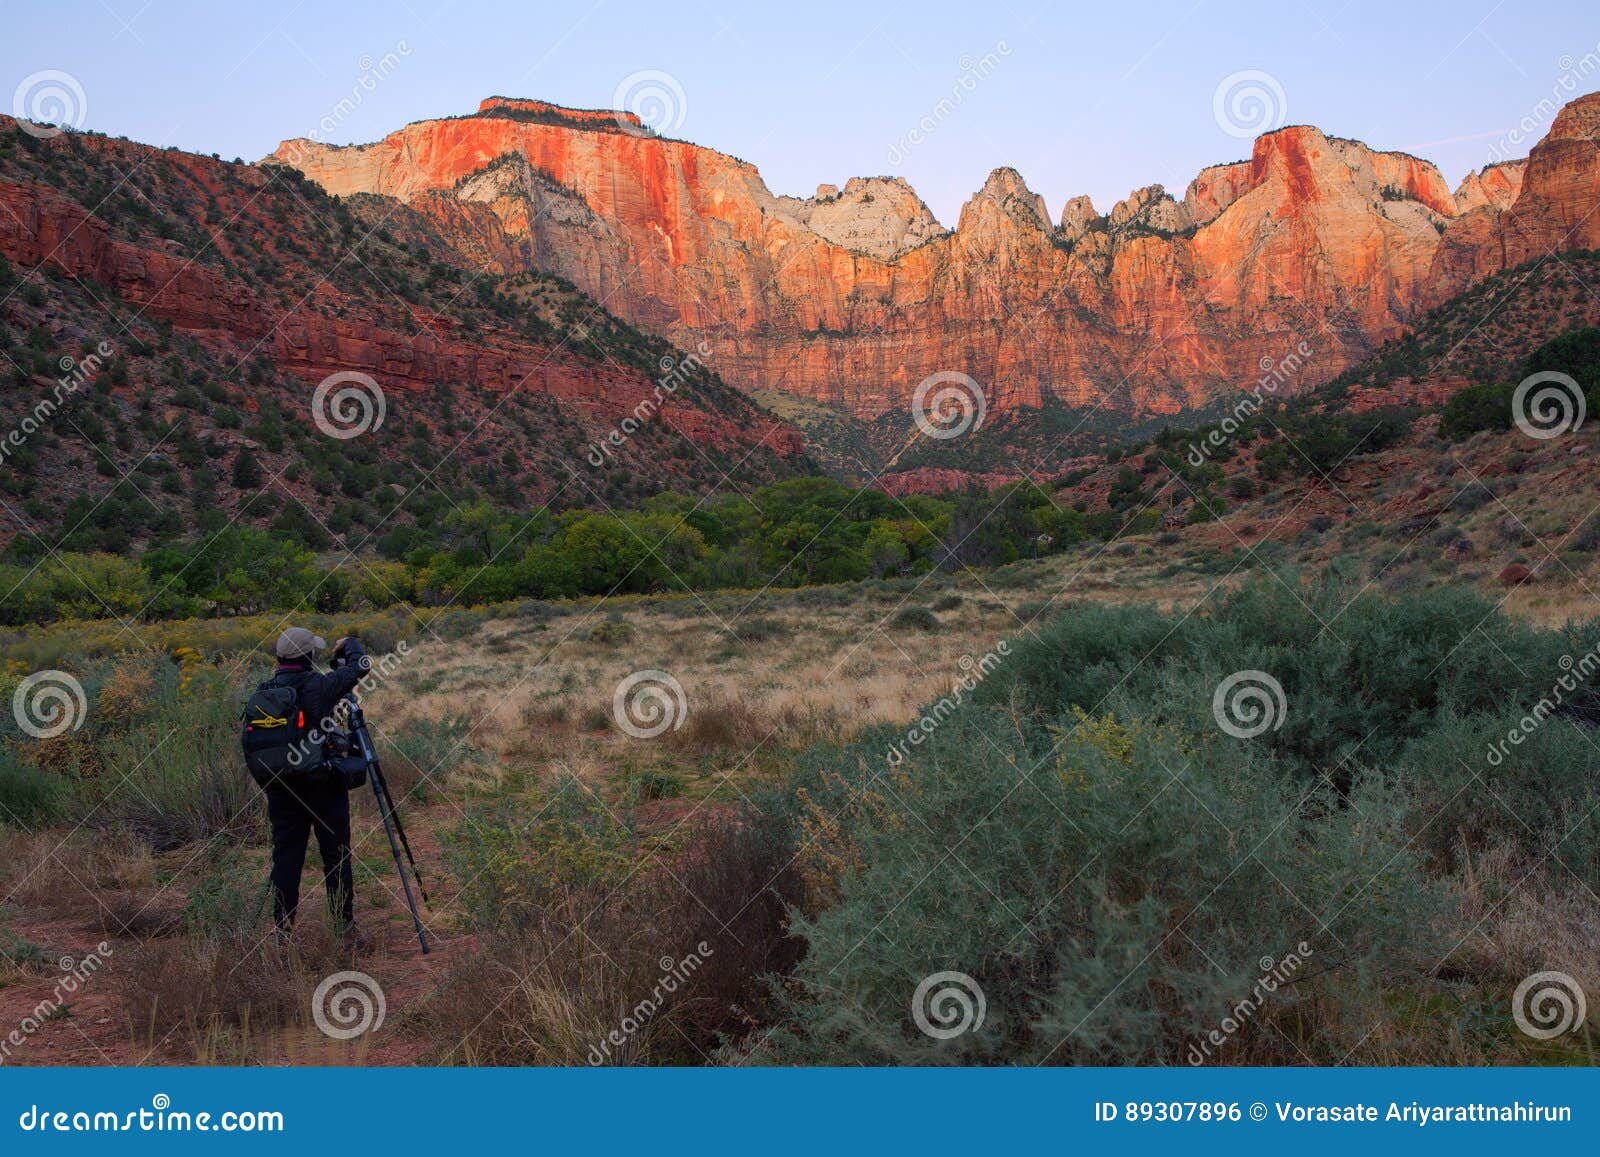 Dawn At Towers Of The Virgin Zion National Park Utah Editorial Photo